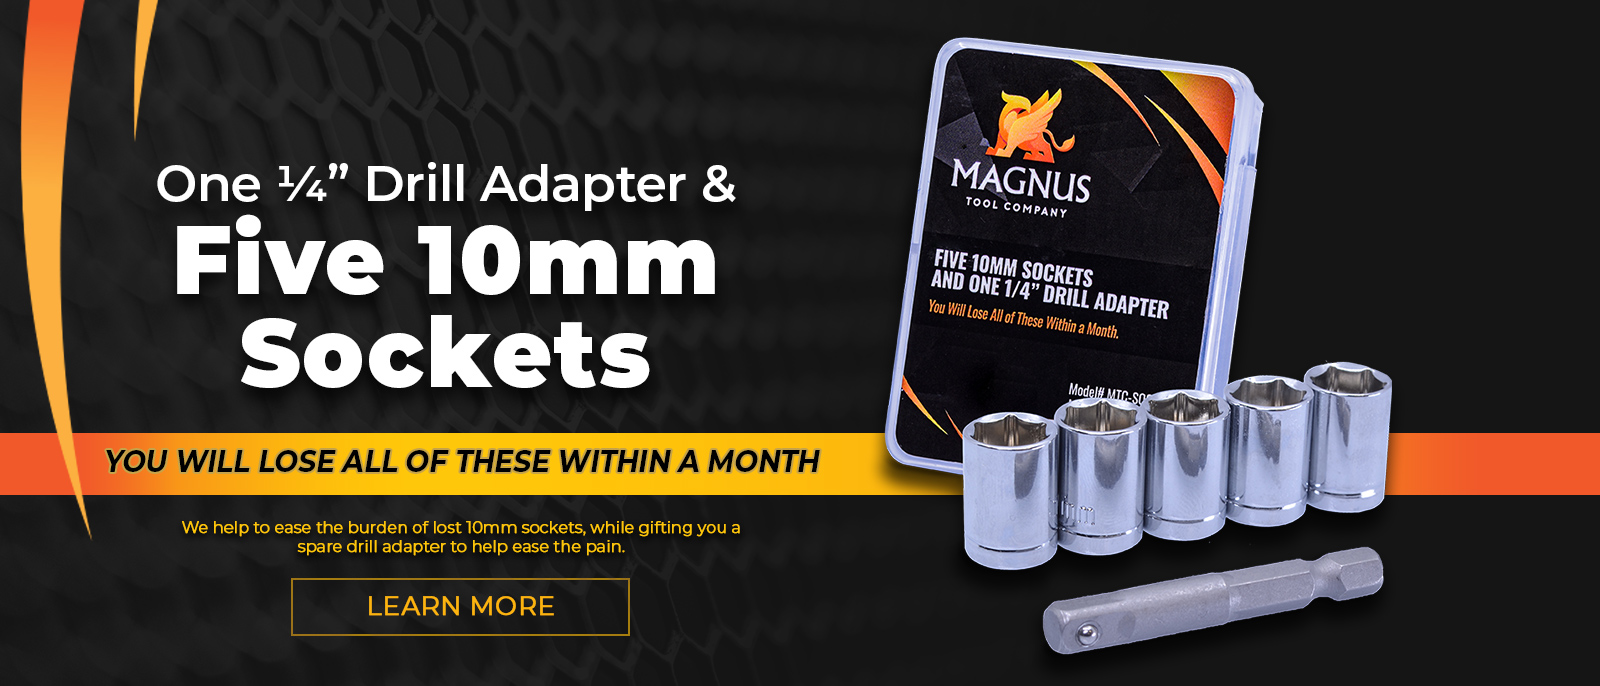 One ¼” Drill Adapter & Five 10mm Sockets